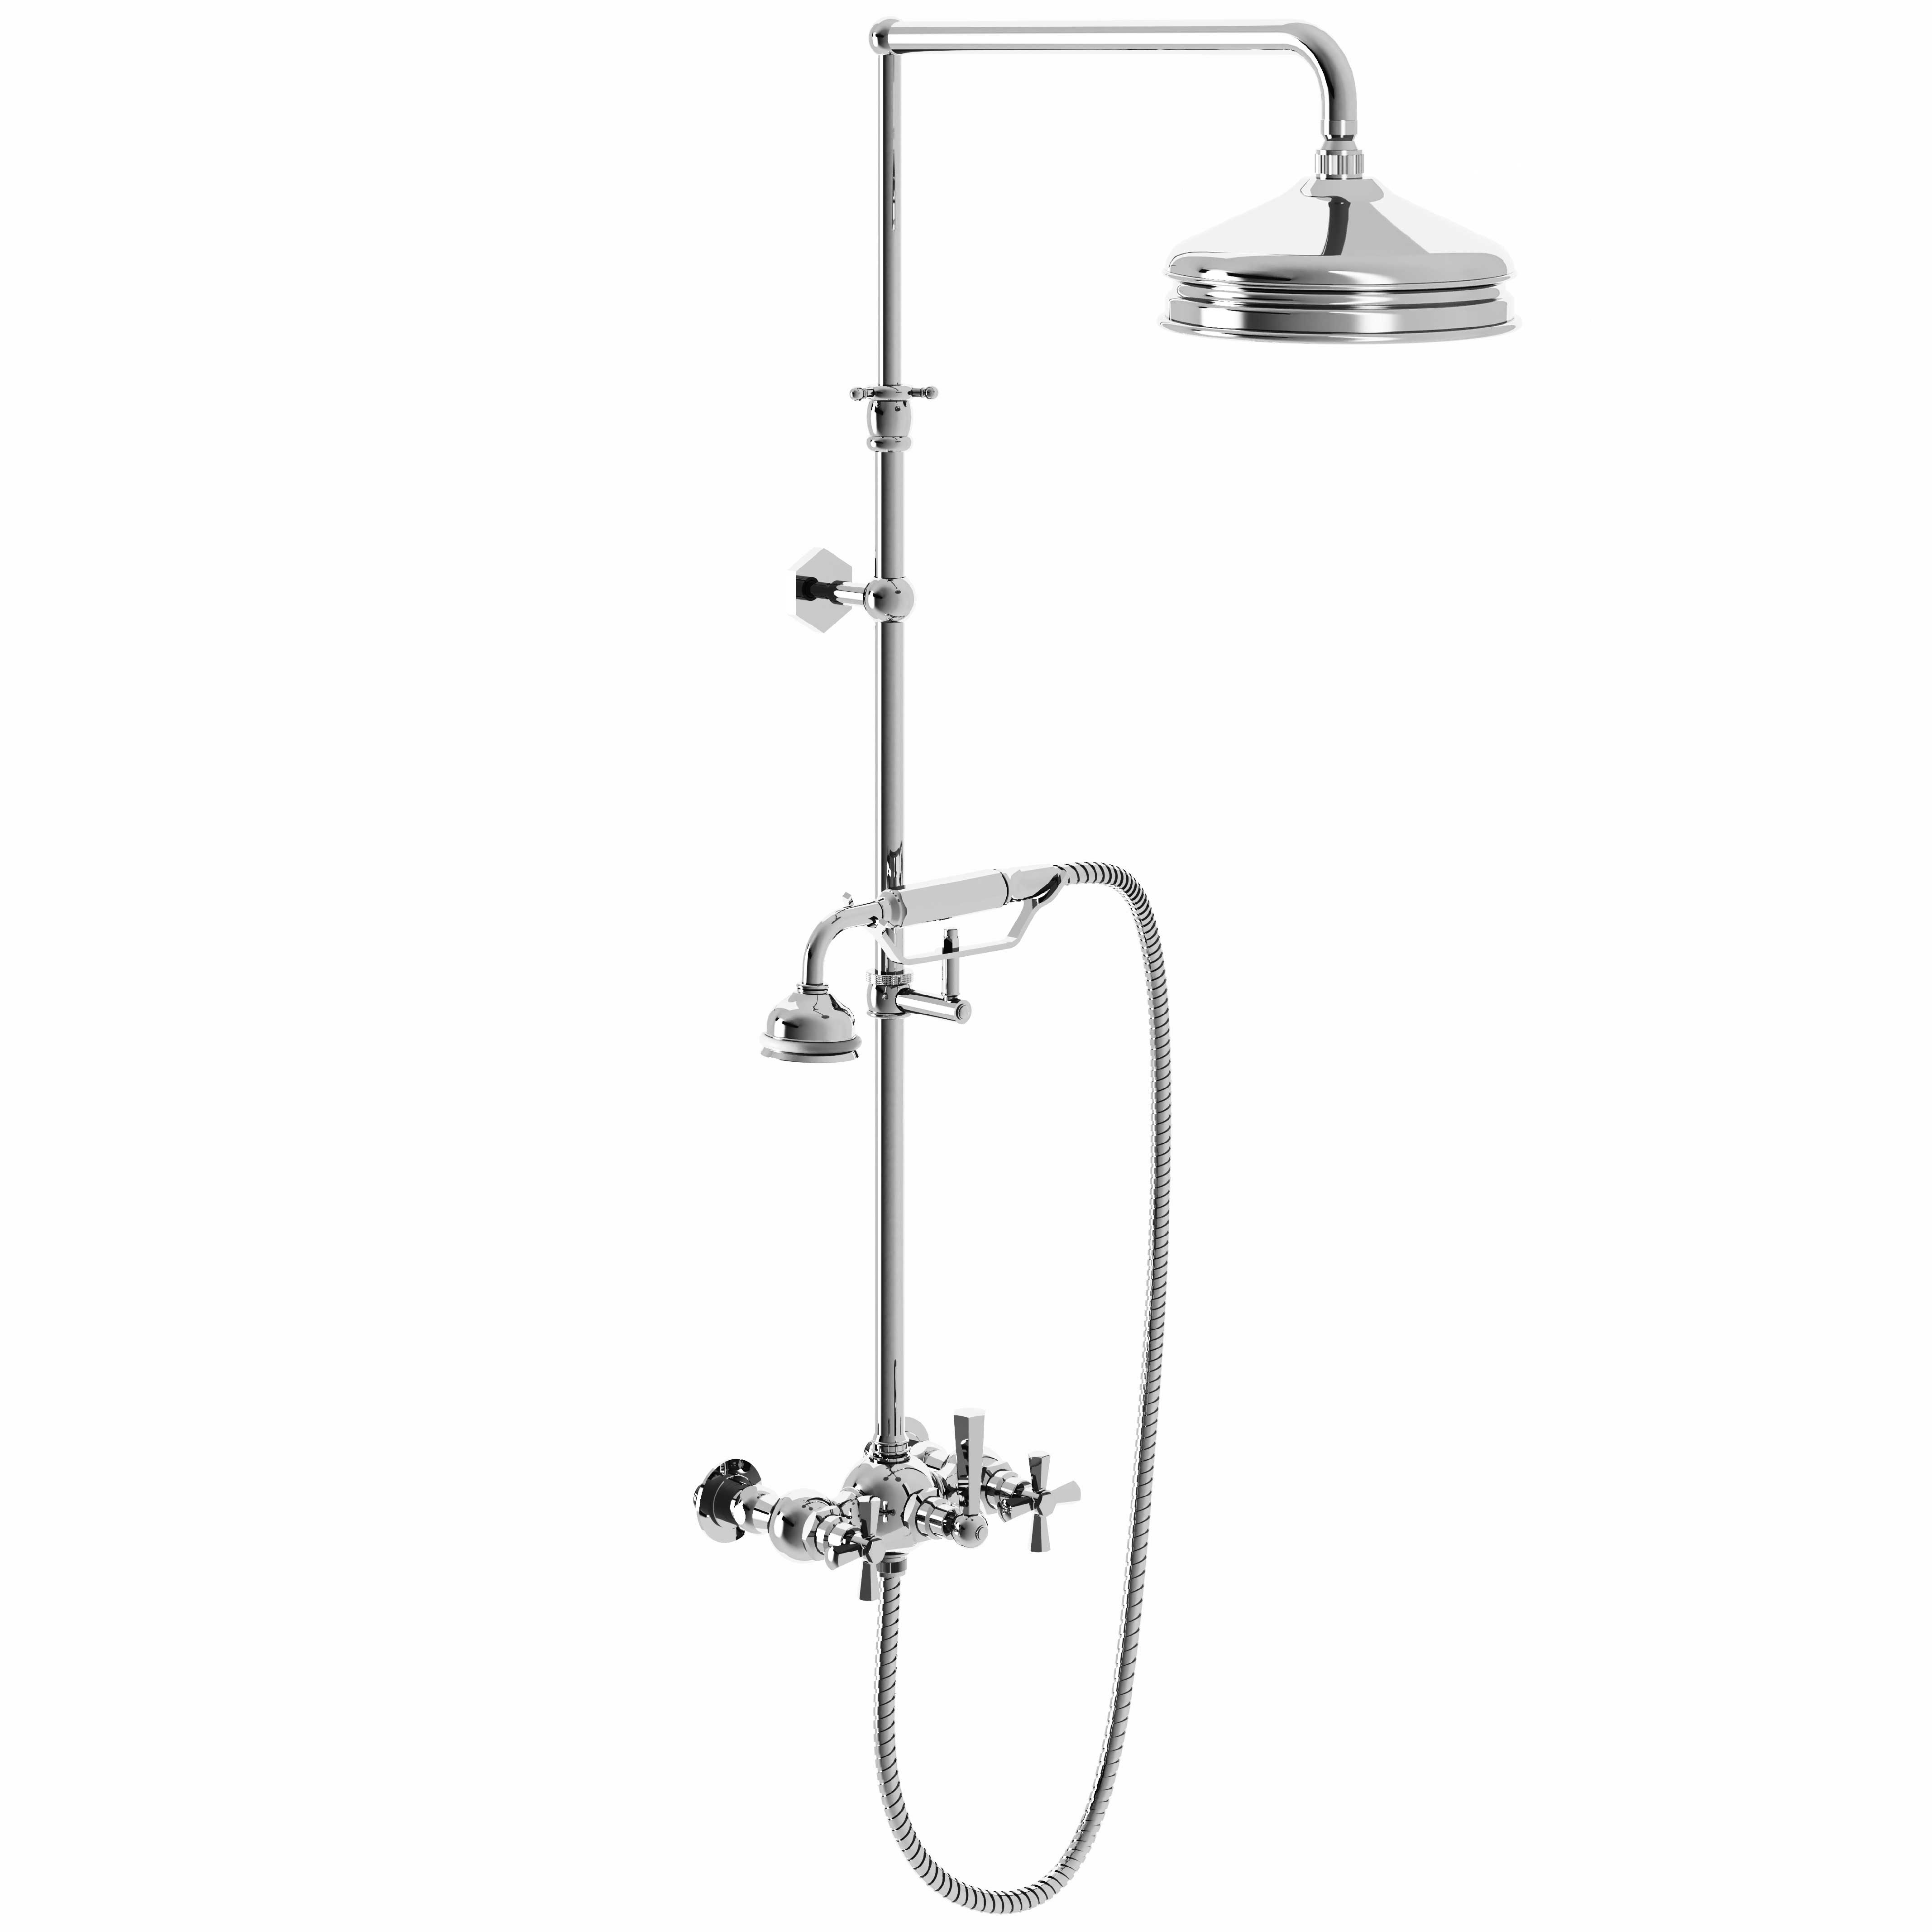 M38-2204 Shower mixer with column, anti-scaling